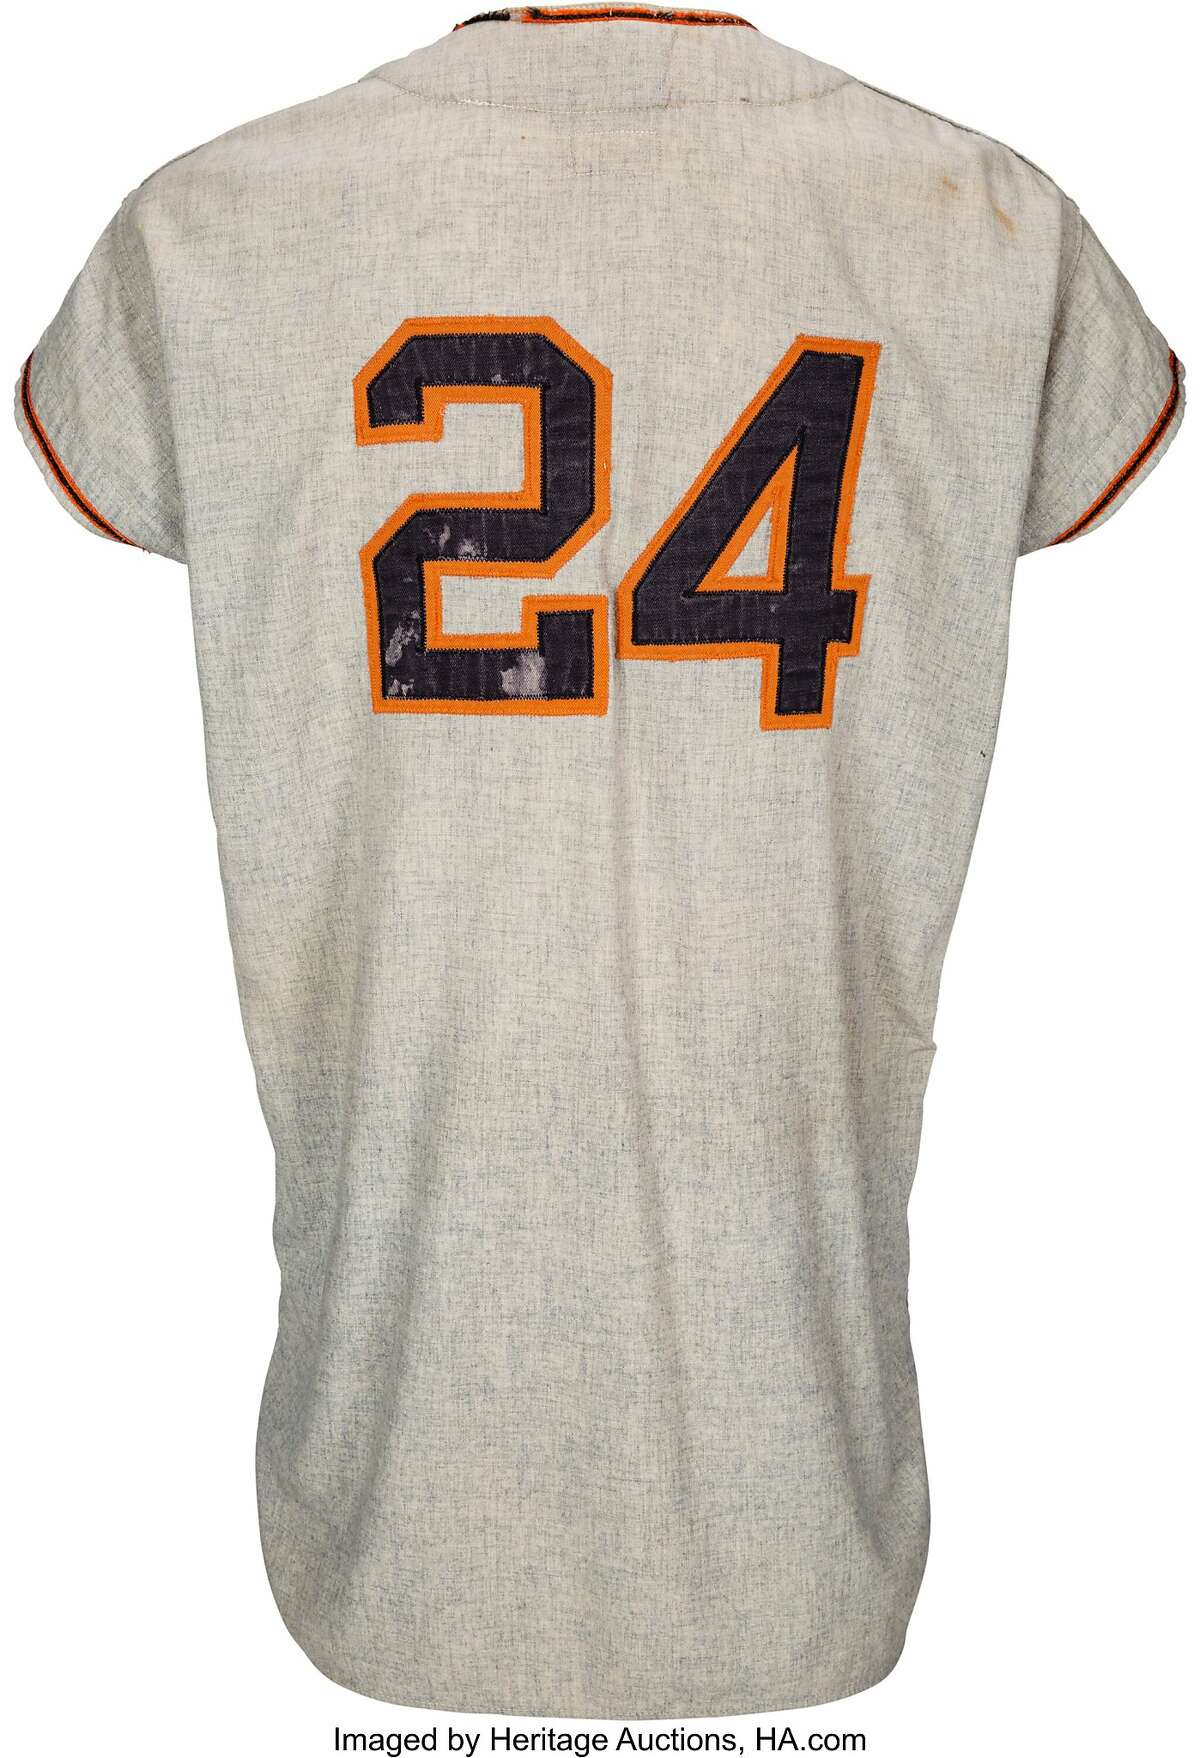 1966 Willie Mays Game Worn San Francisco Giants Jersey, MEARS, Lot #80138